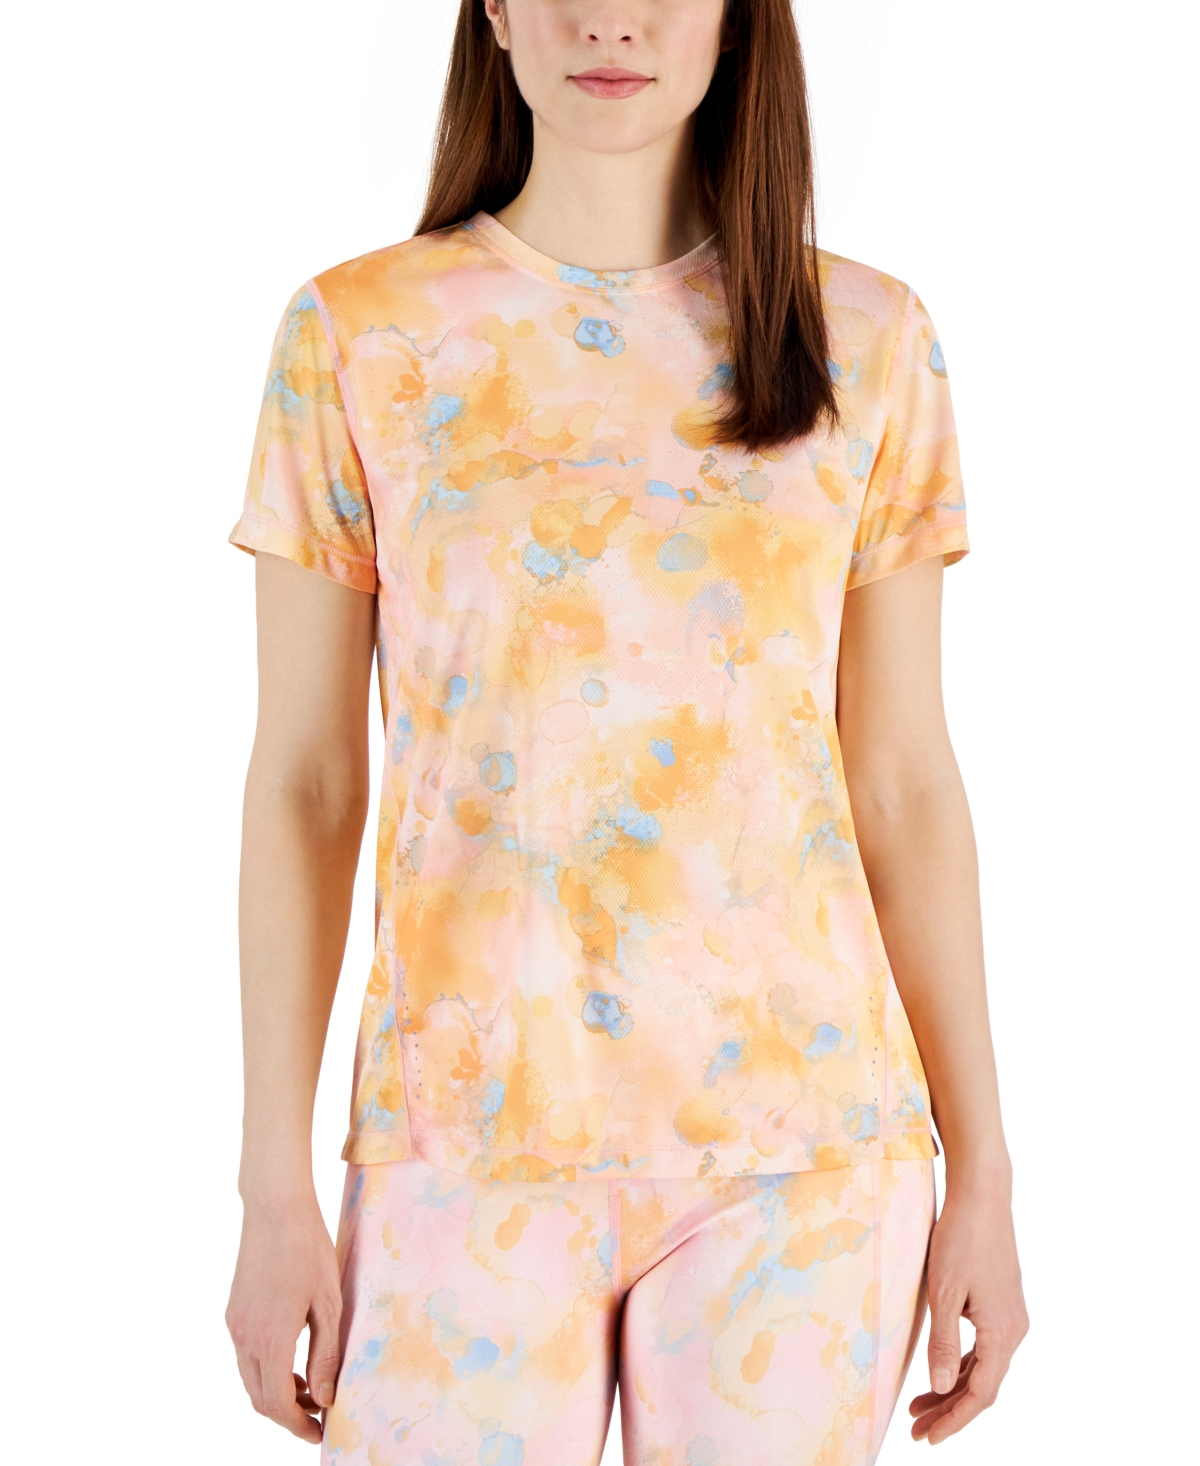 Women's Printed Birdseye-Mesh Short-Sleeve Top, Created for Macy's - Pink Icing